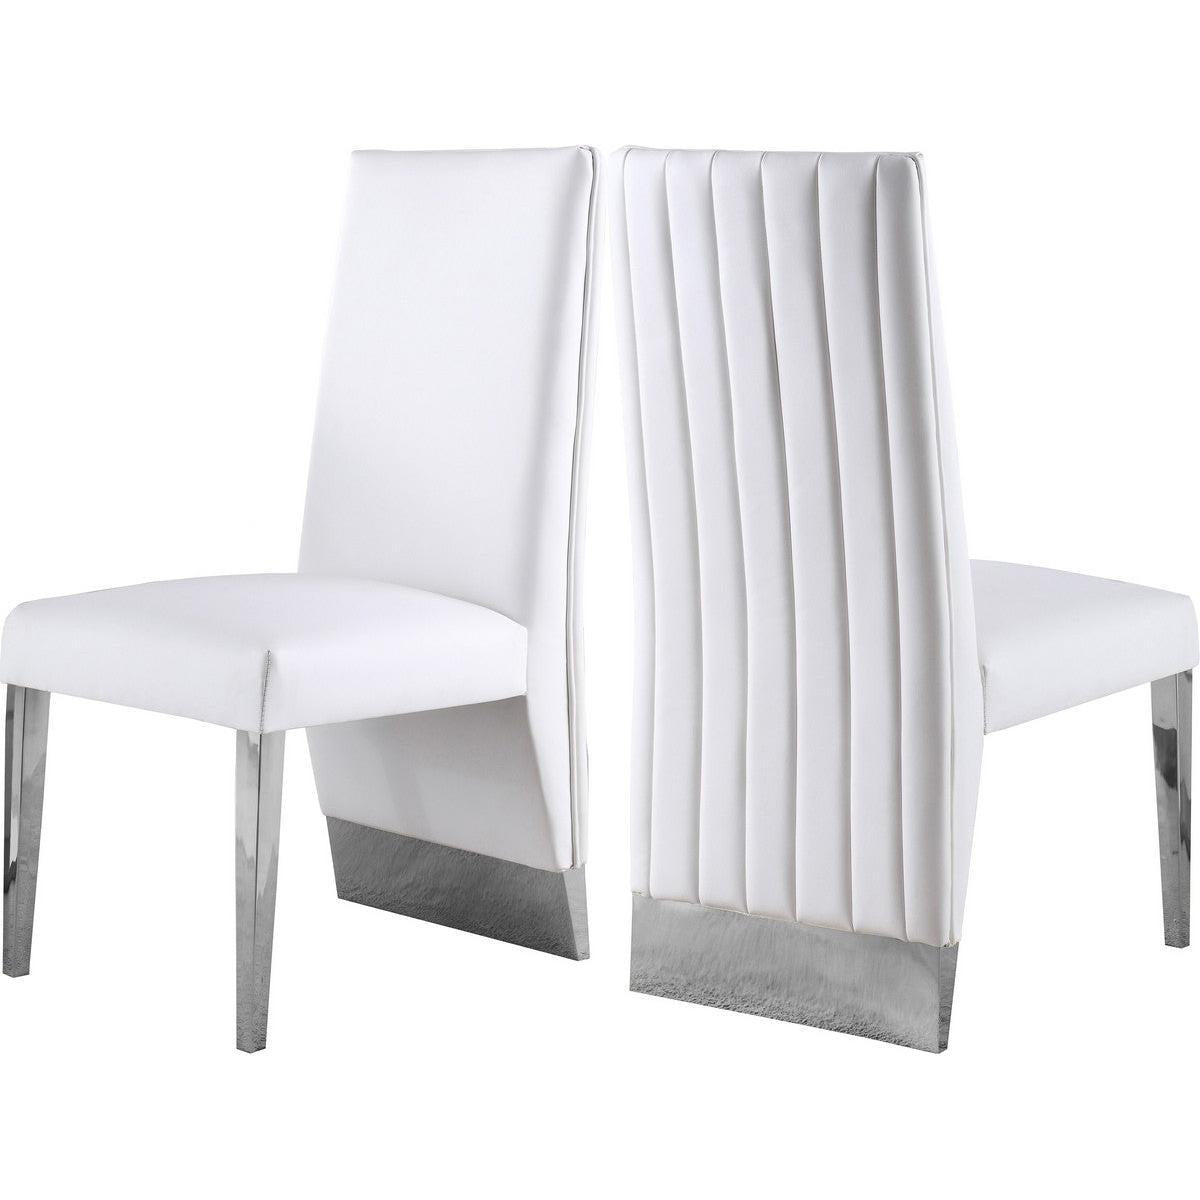 Meridian Furniture Porsha White Faux Leather Dining ChairMeridian Furniture - Dining Chair - Minimal And Modern - 1